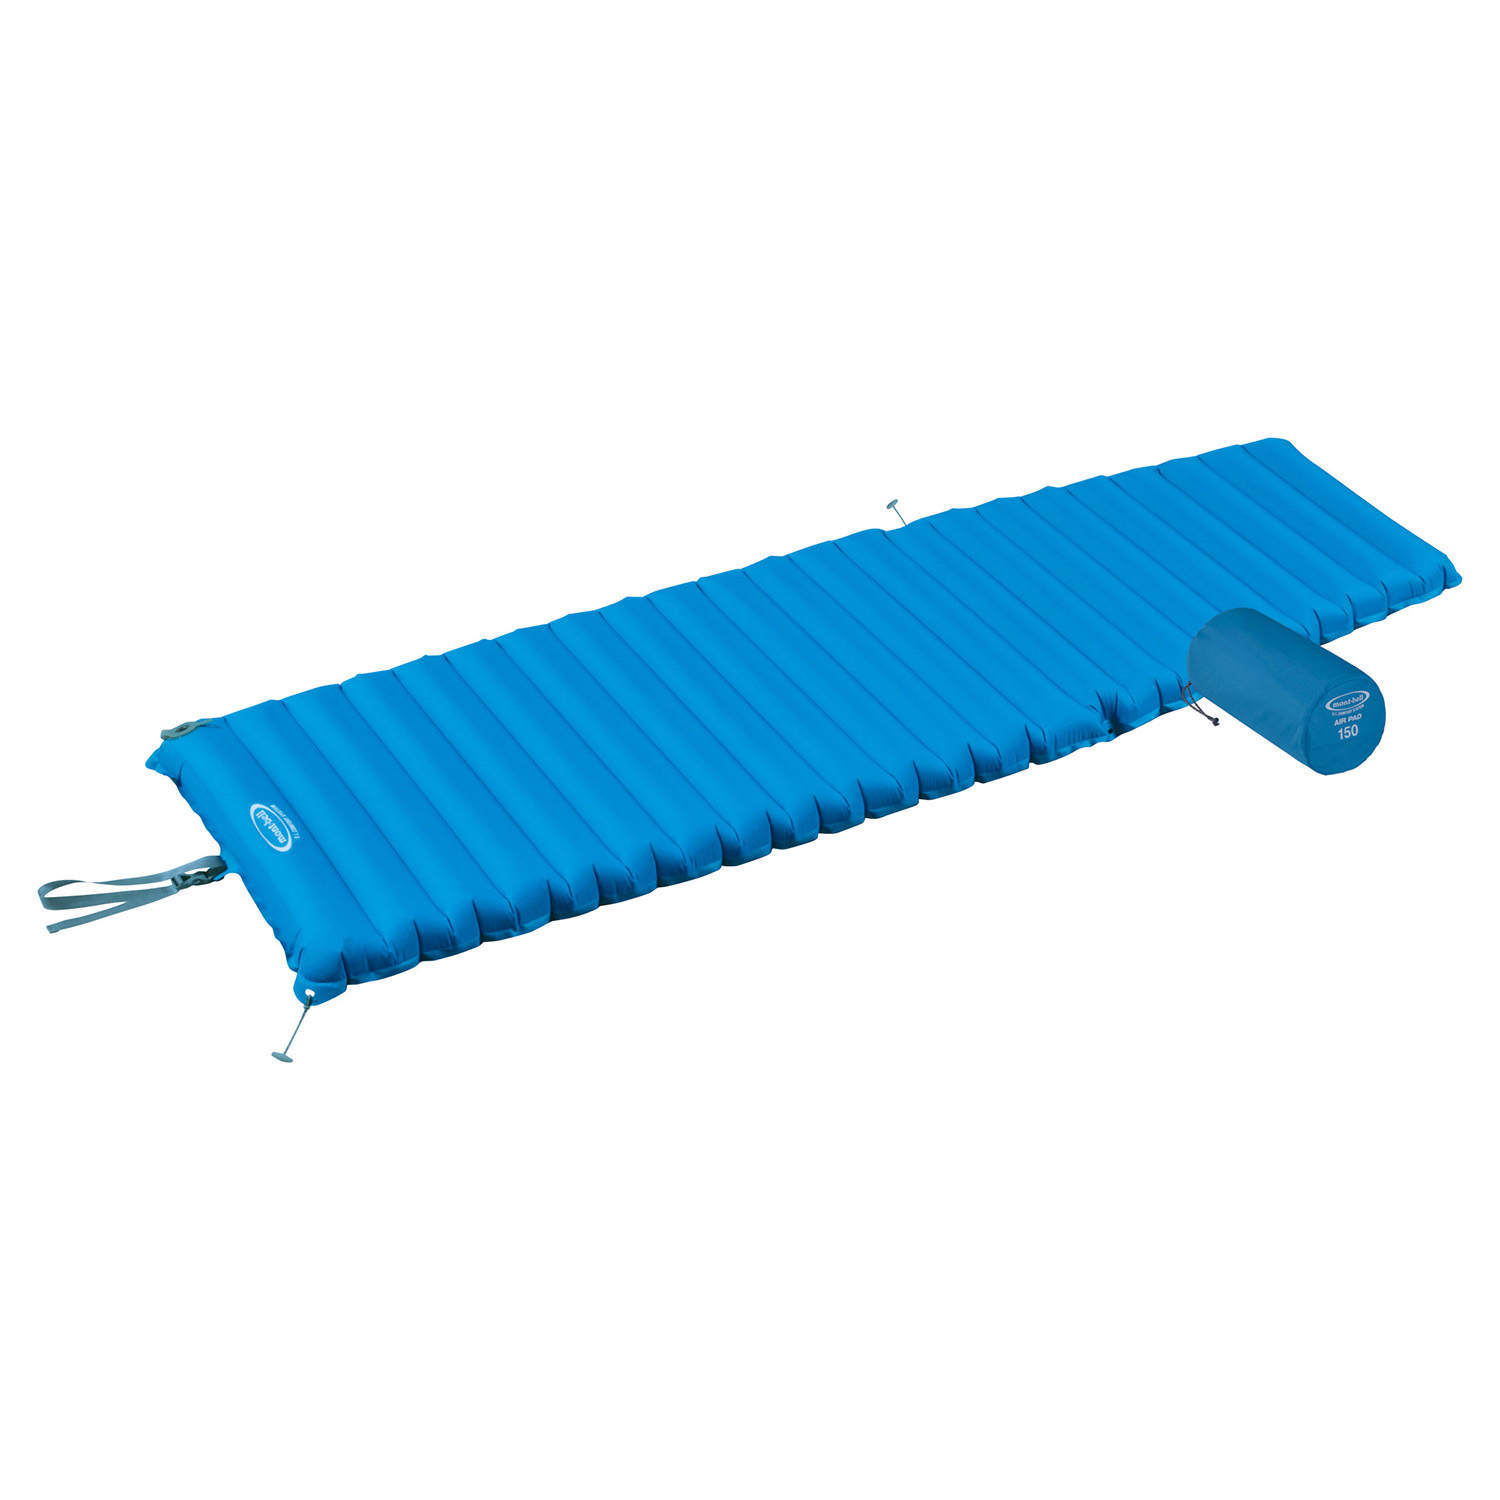 U.L. Comfort System Air Pad 150 | Montbell America